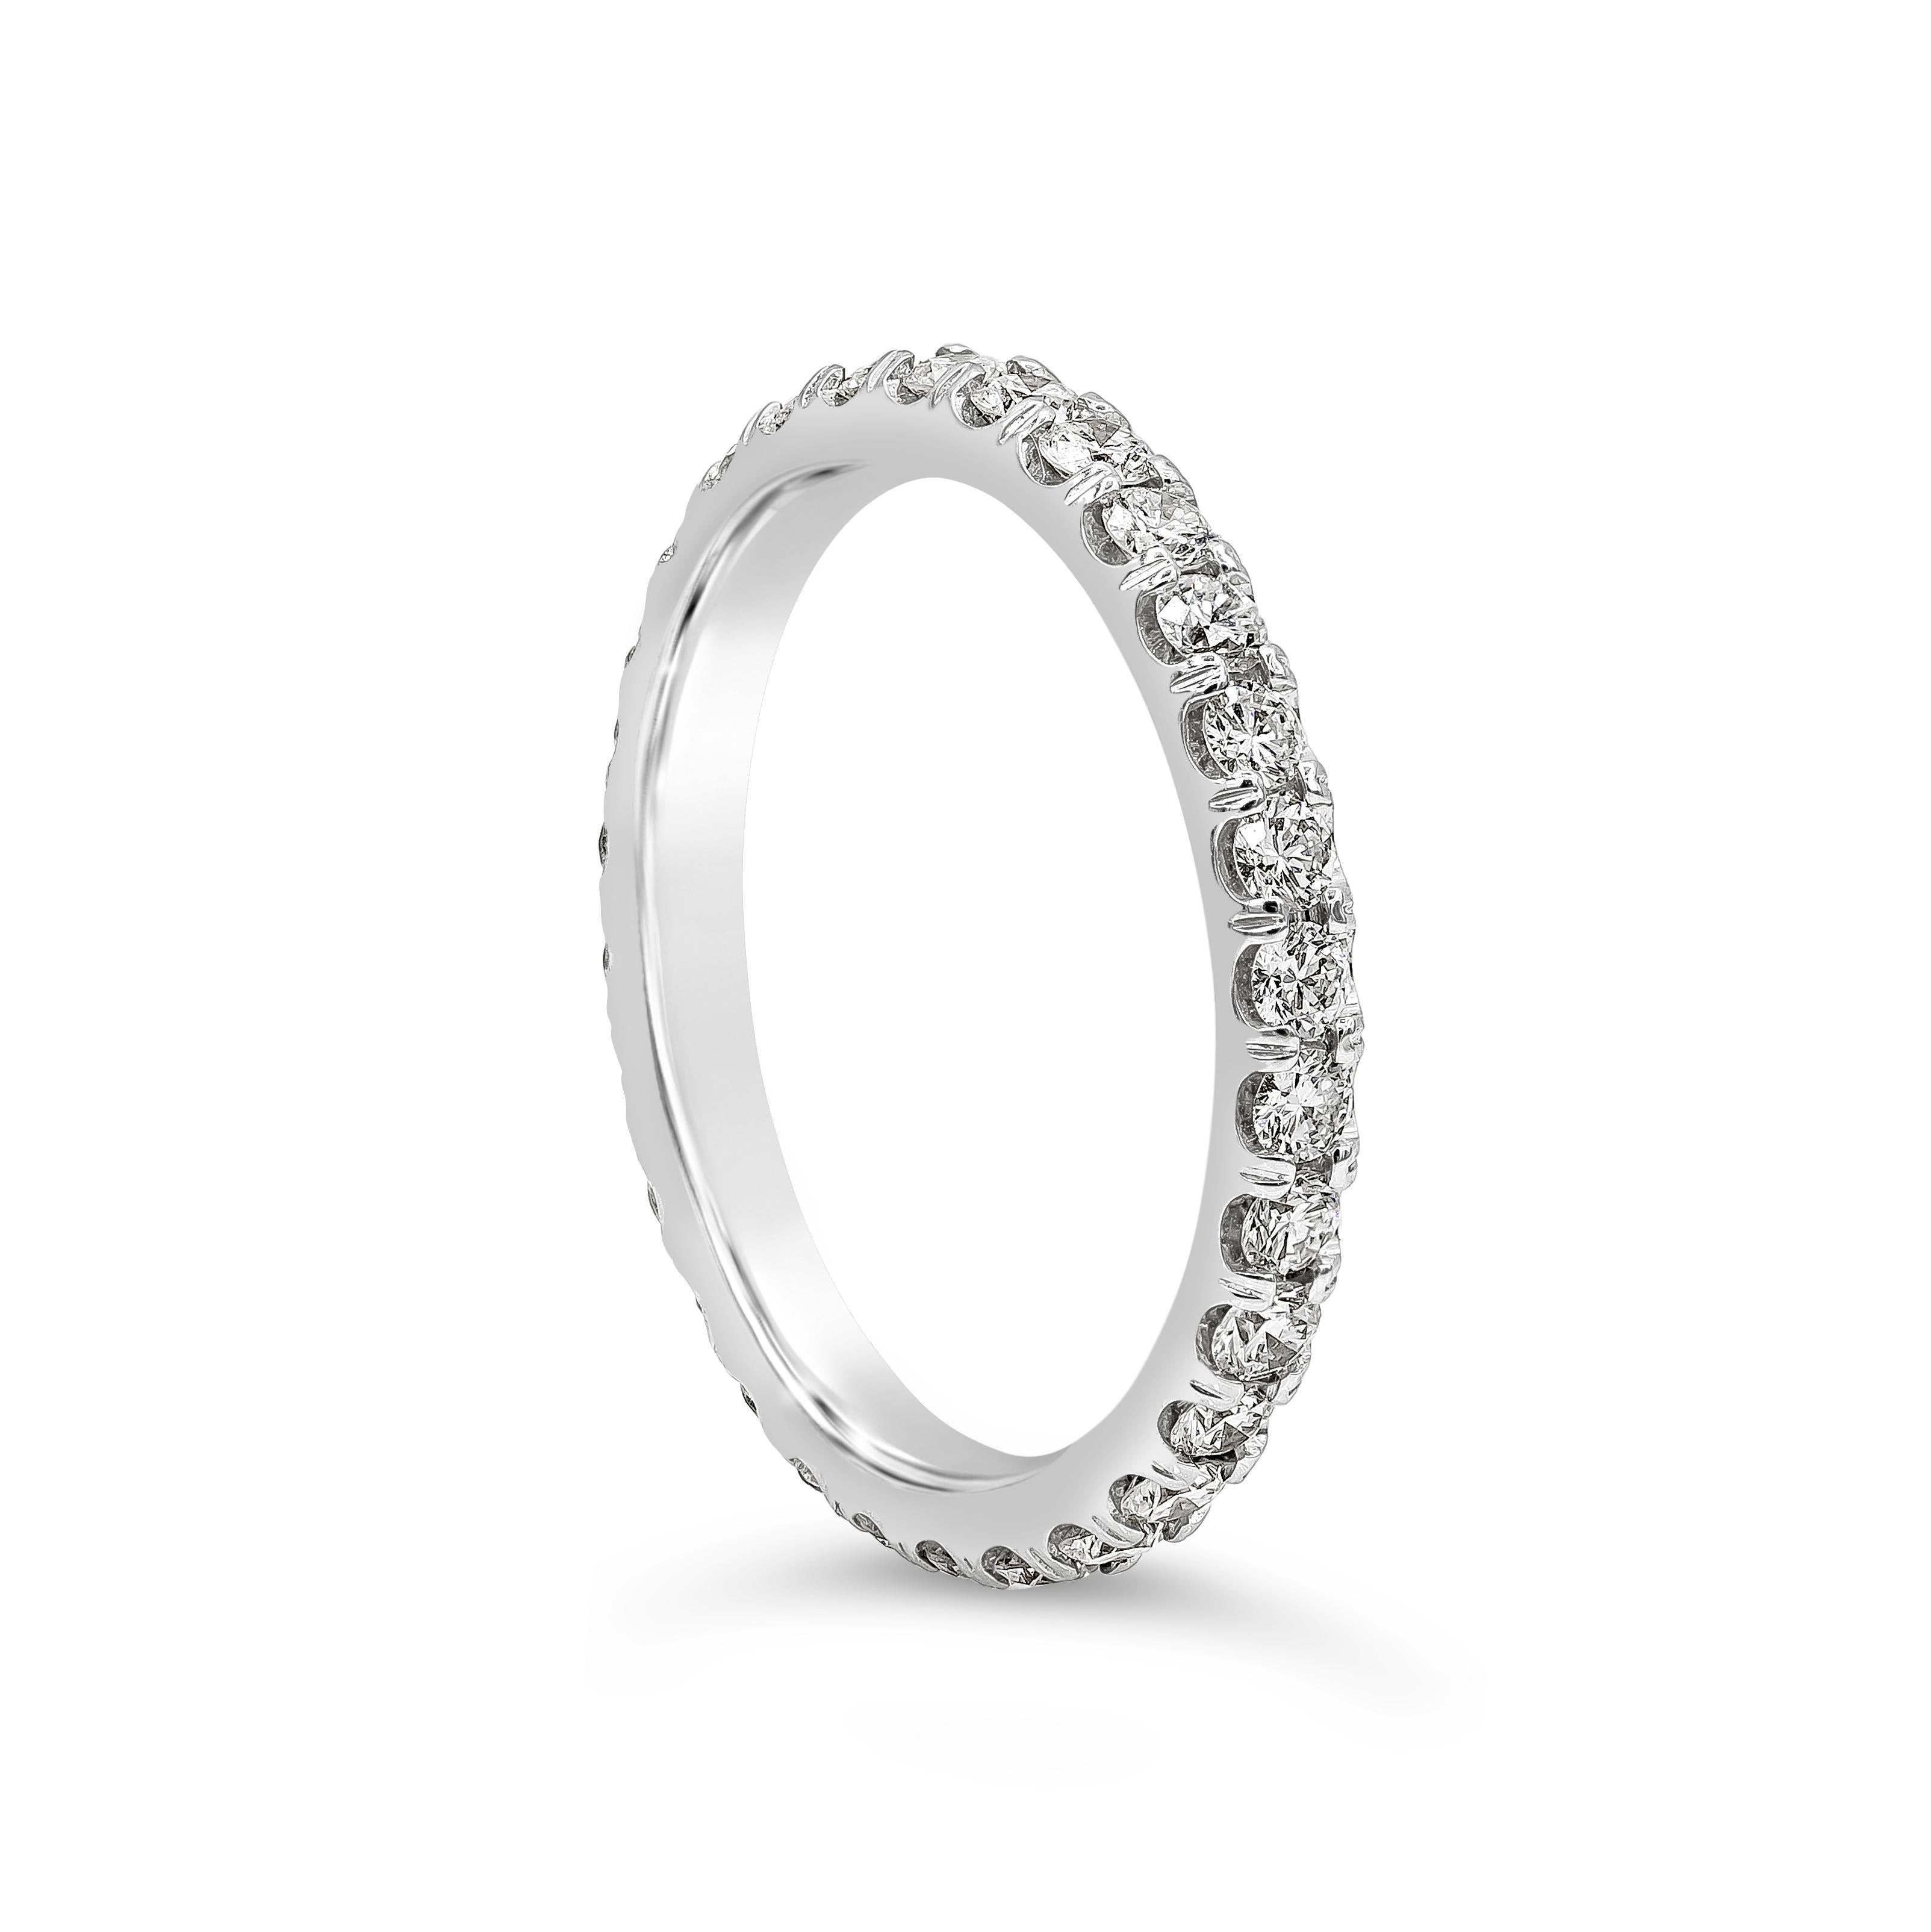 A classic eternity wedding band style showcasing a row of brilliant round diamonds weighing 0.90 carats total, Scalloped pave-set, Made with 18K White Gold Size 6 US

Style available in different price ranges. Prices are based on your selection.